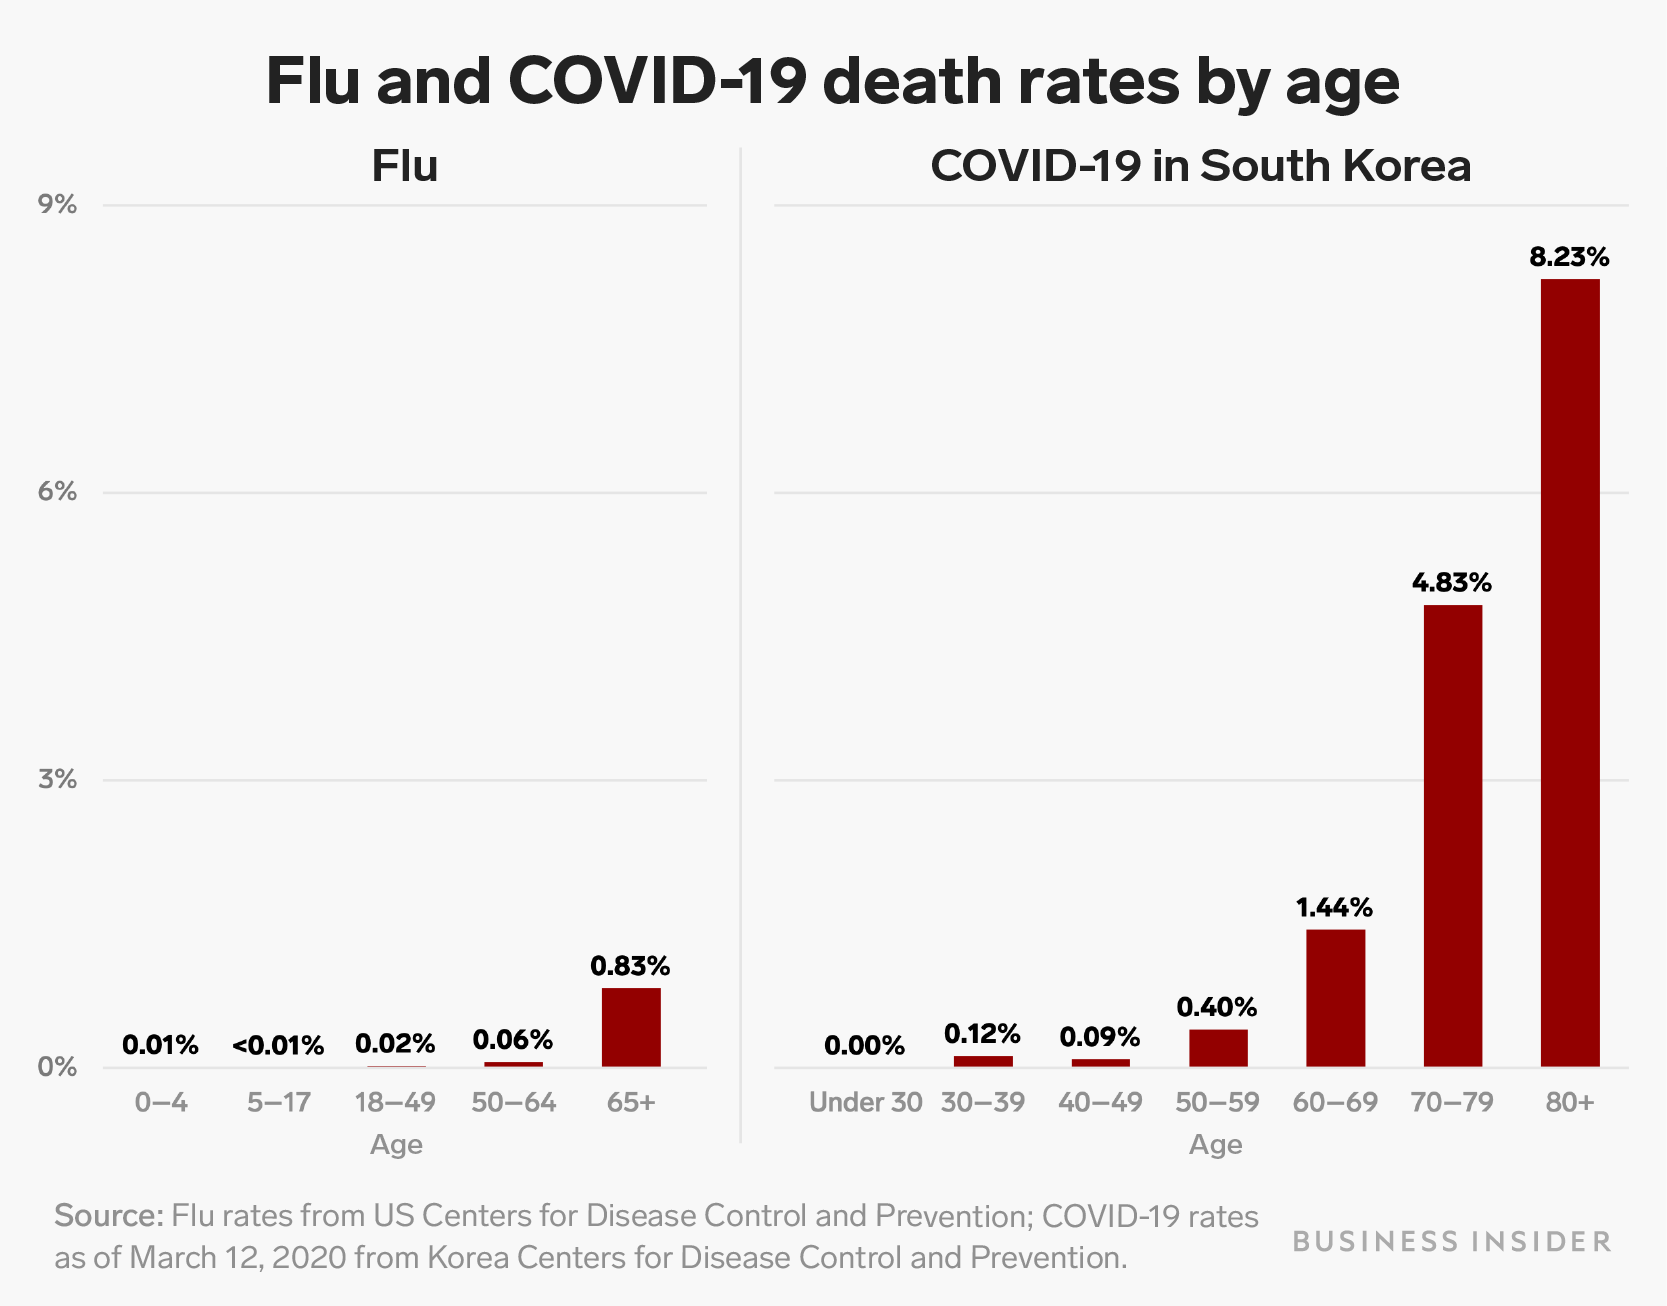 Chart showing death rates by age group for for Flu and Covid-19